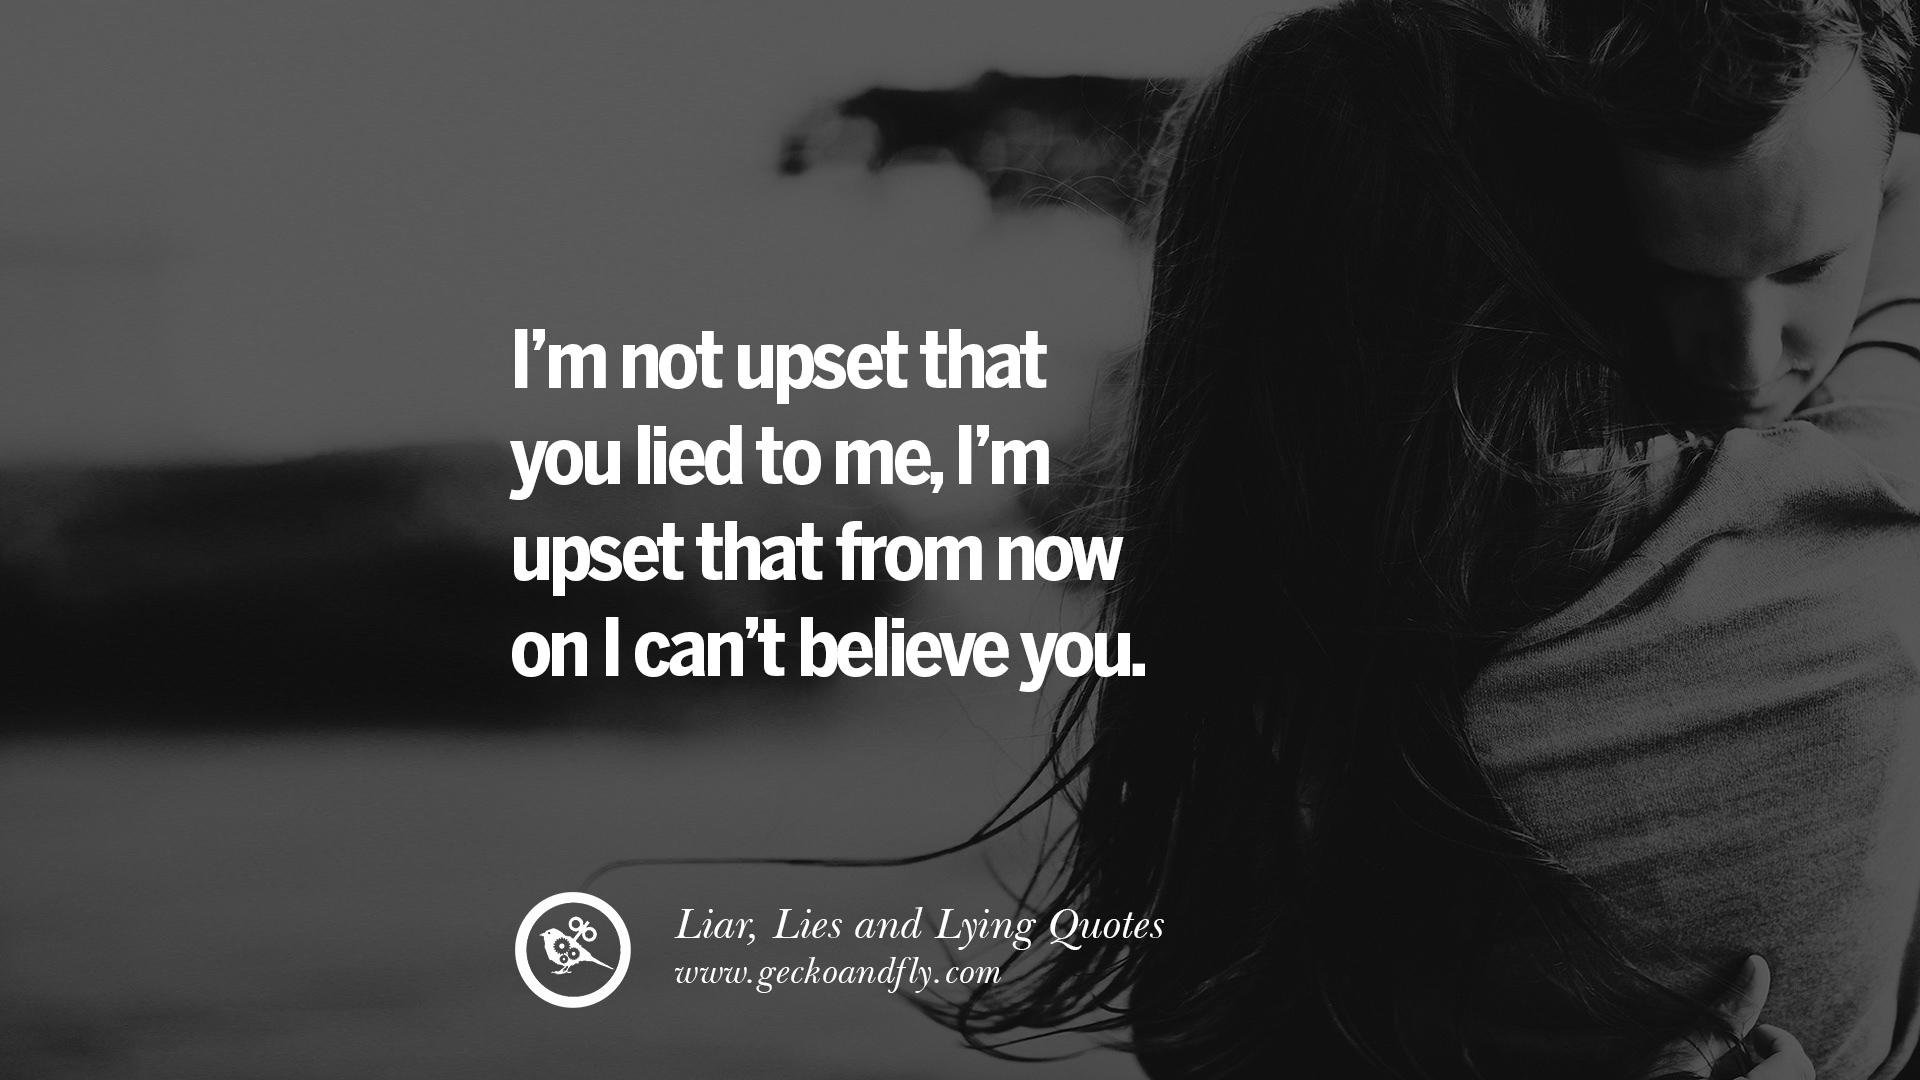 60 Quotes About Liar, Lies and Lying Boyfriend In A ...